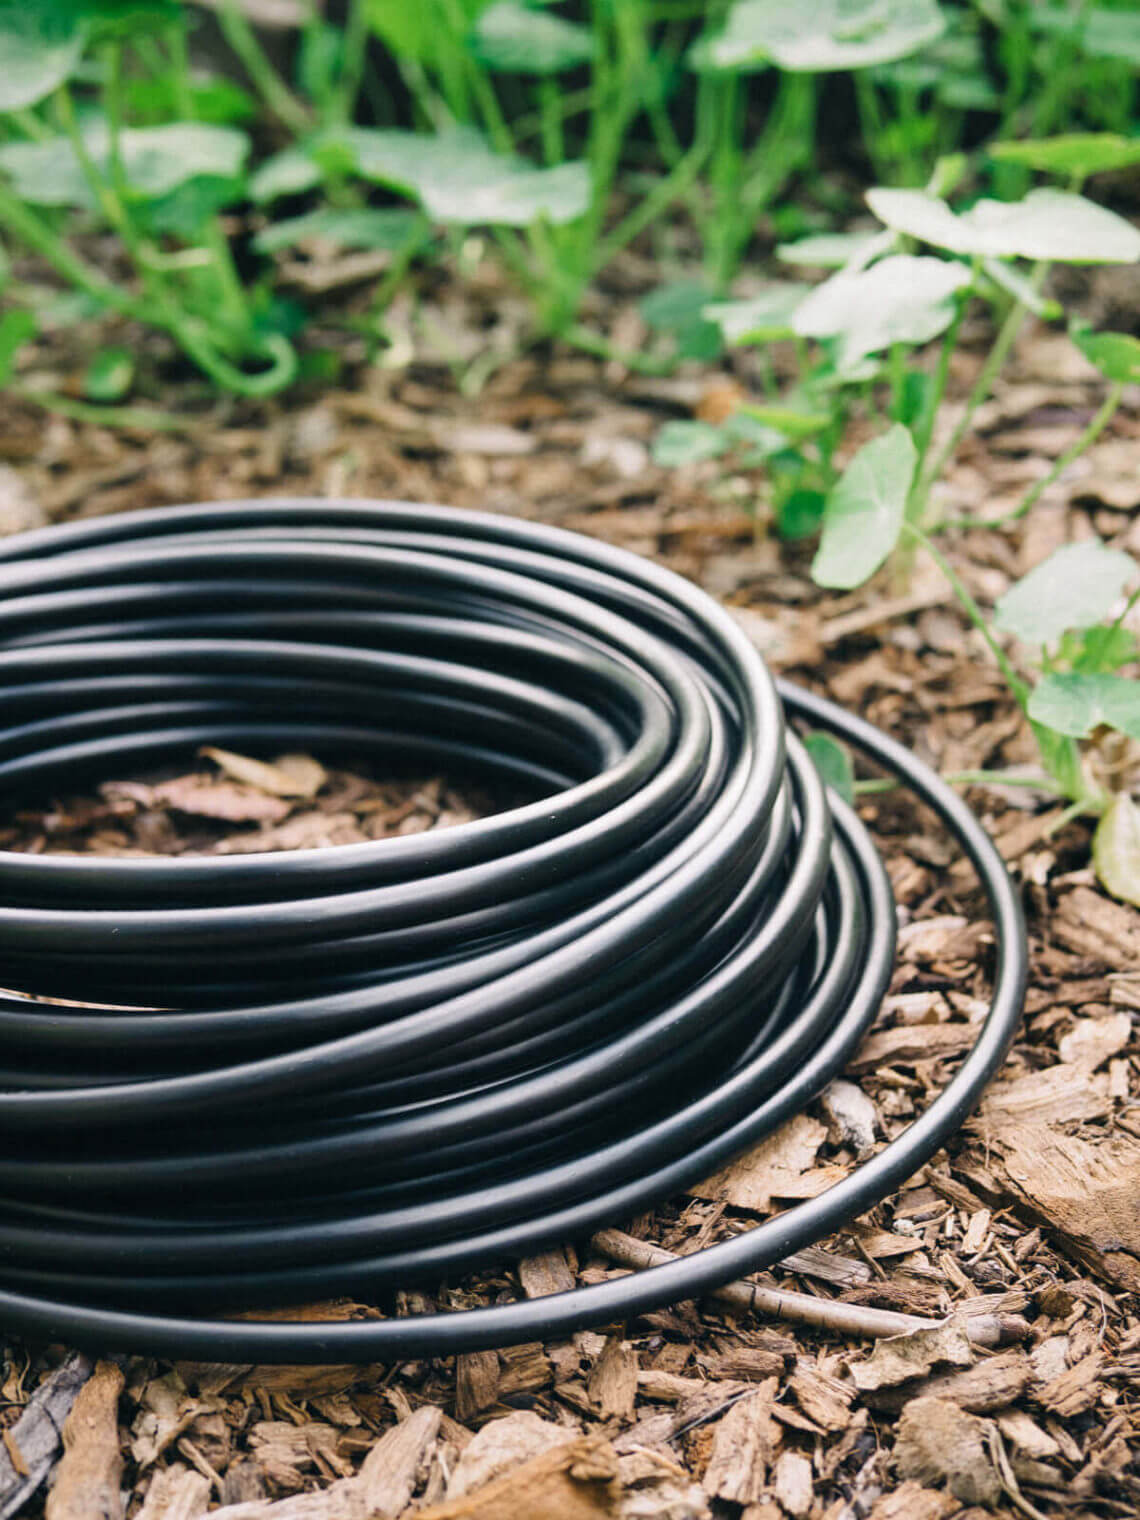 Drip irrigation: watering your garden while saving your resources